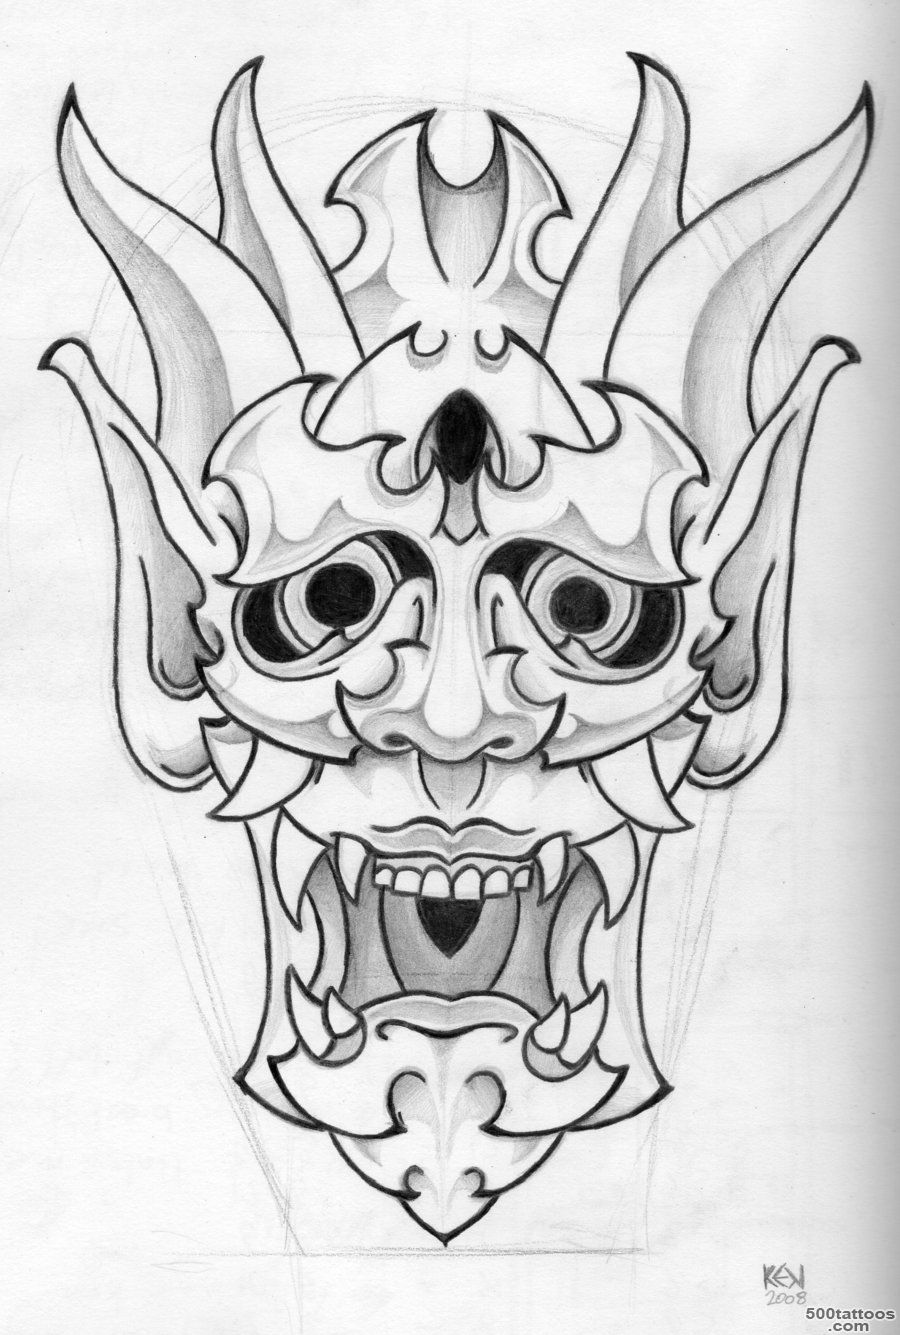 Mask Tattoos, Designs And Ideas  Page 32_50